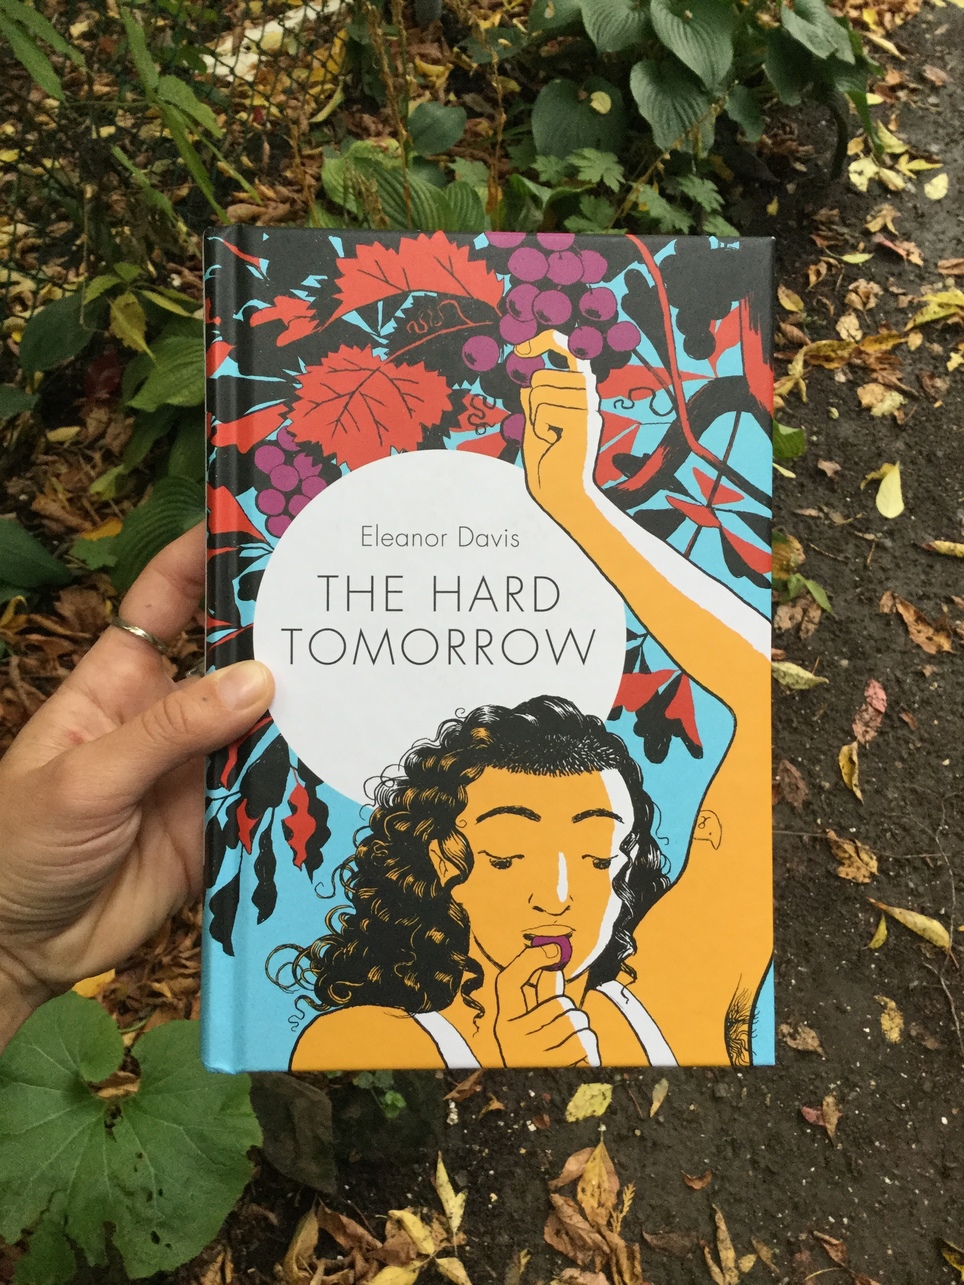 New D+Q: Eleanor Davis's The Hard Tomorrow is out today!